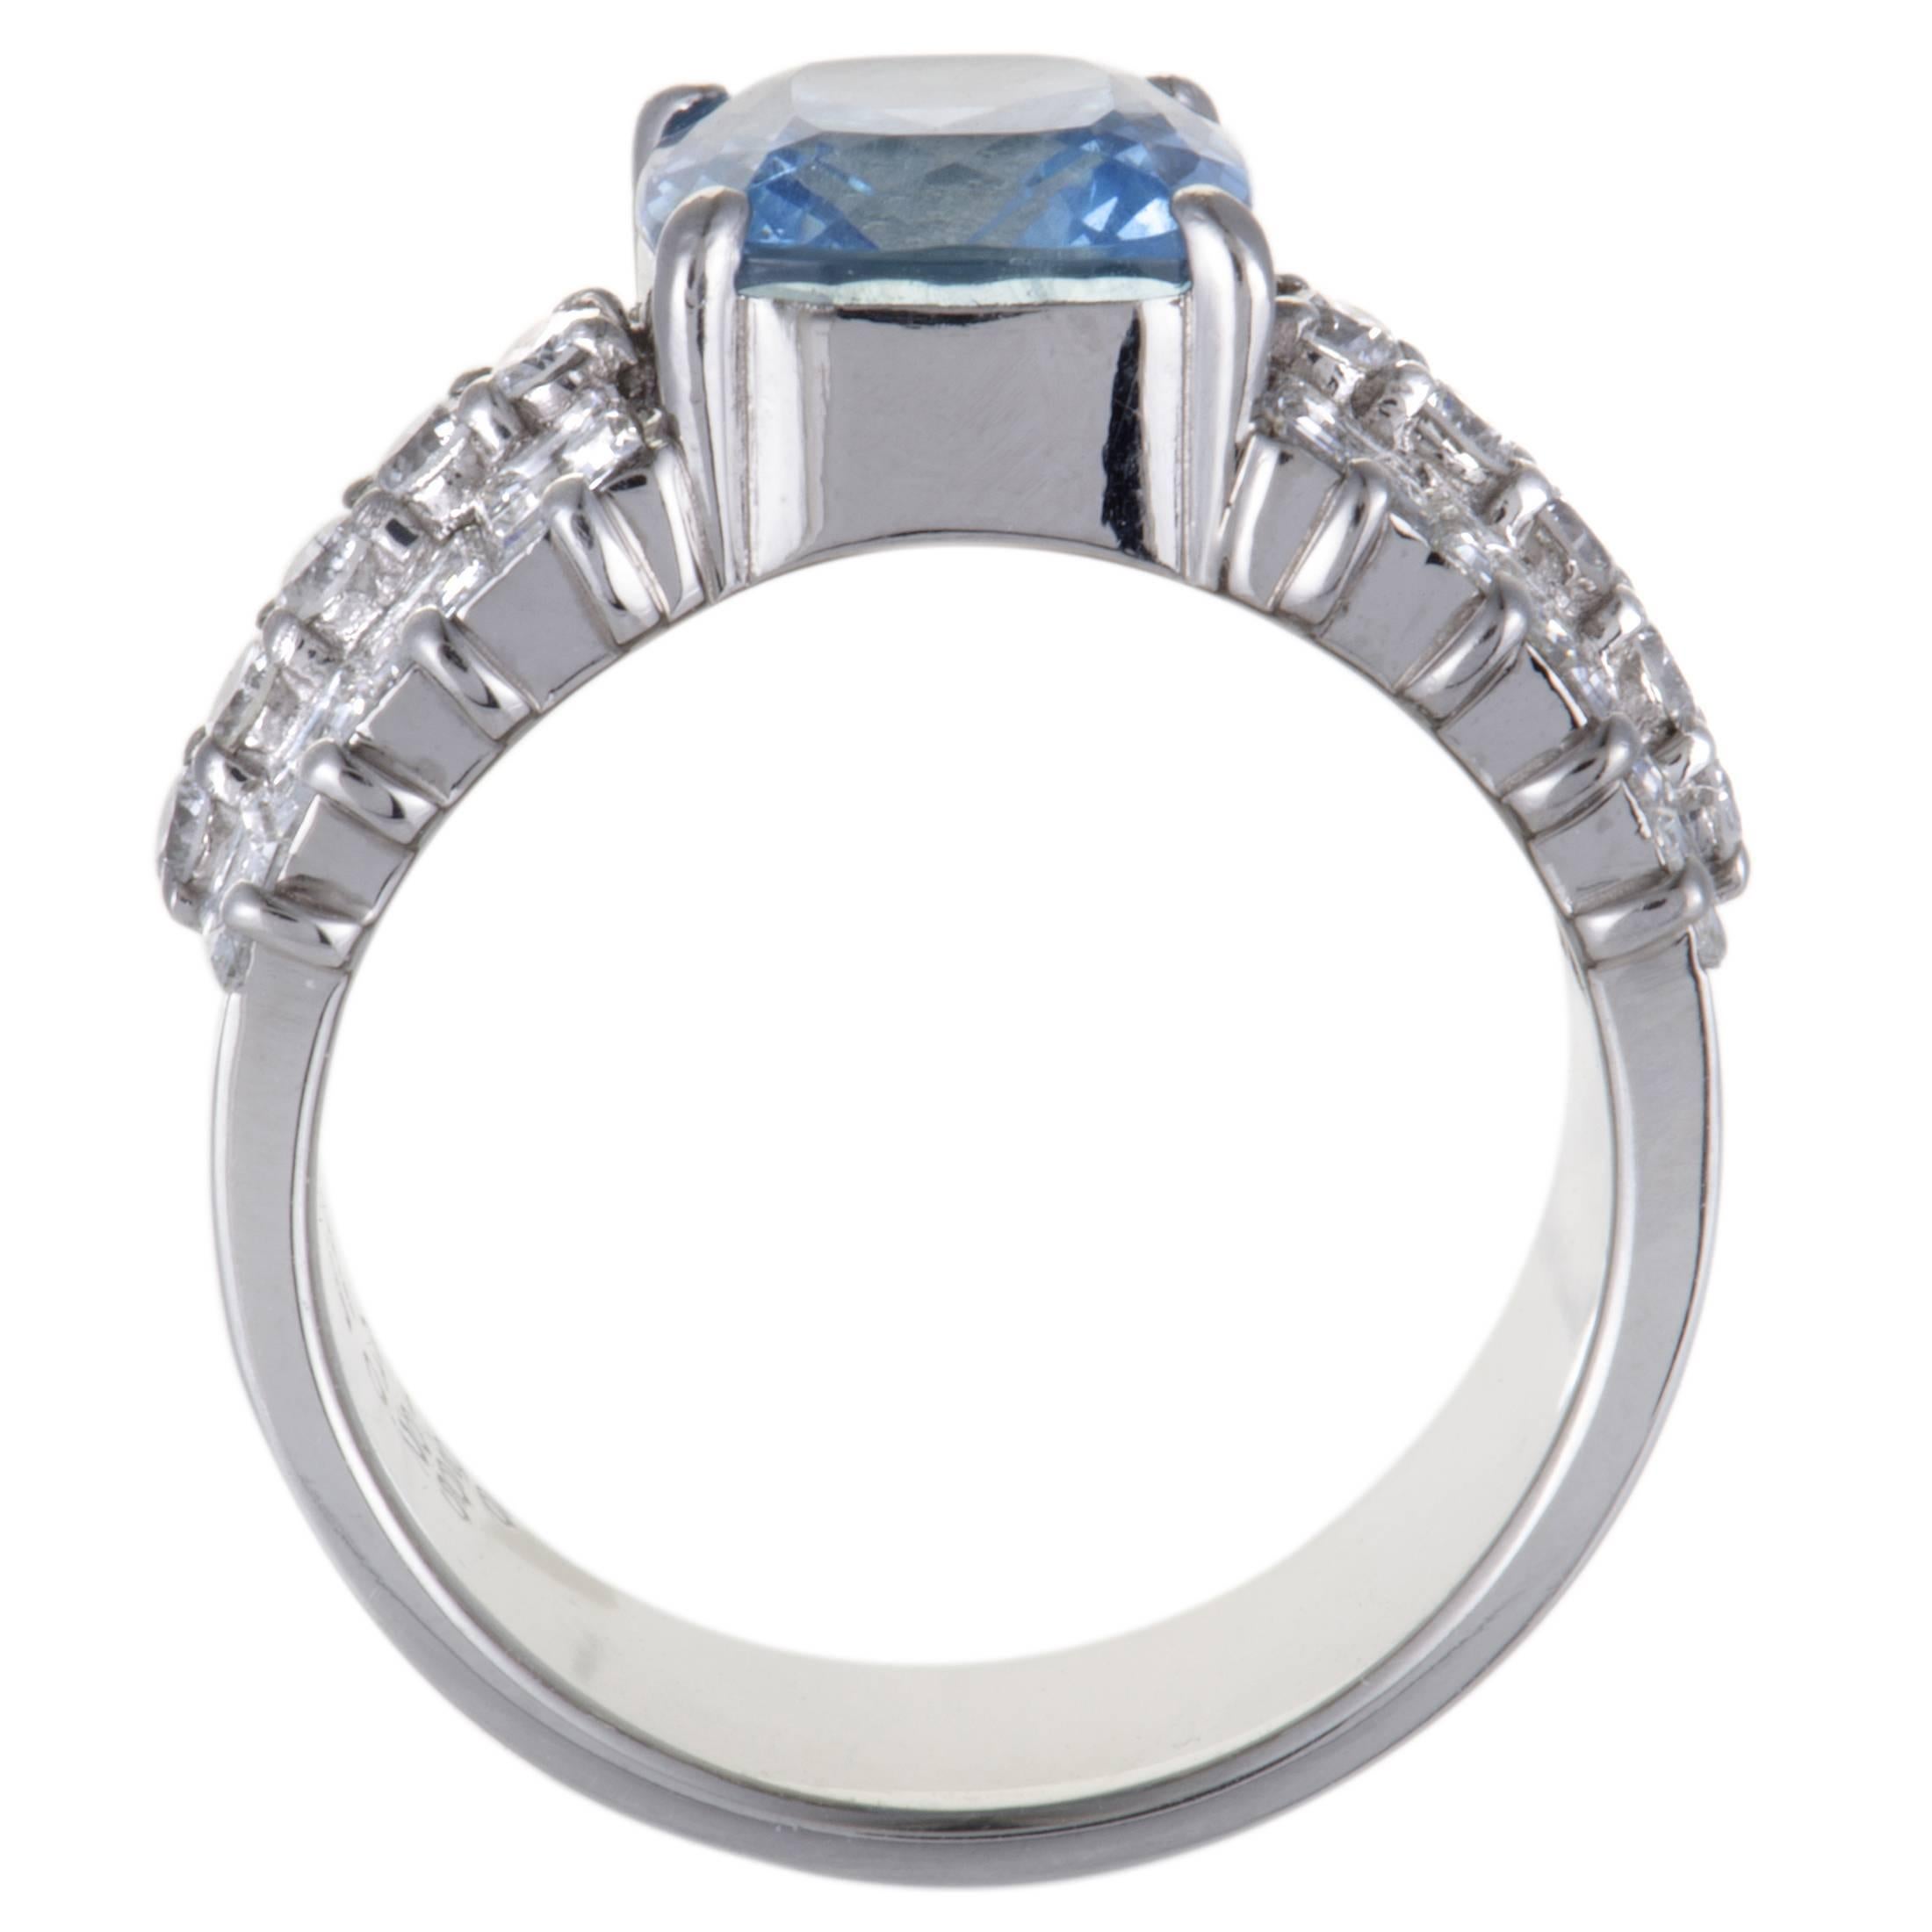 This gorgeous ring features an enthralling design and compels with its distinctly feminine appeal. The ring is made in the prestigious gleam of platinum and is set with resplendent diamond stones that weigh 1.91 carats and a captivating aquamarine